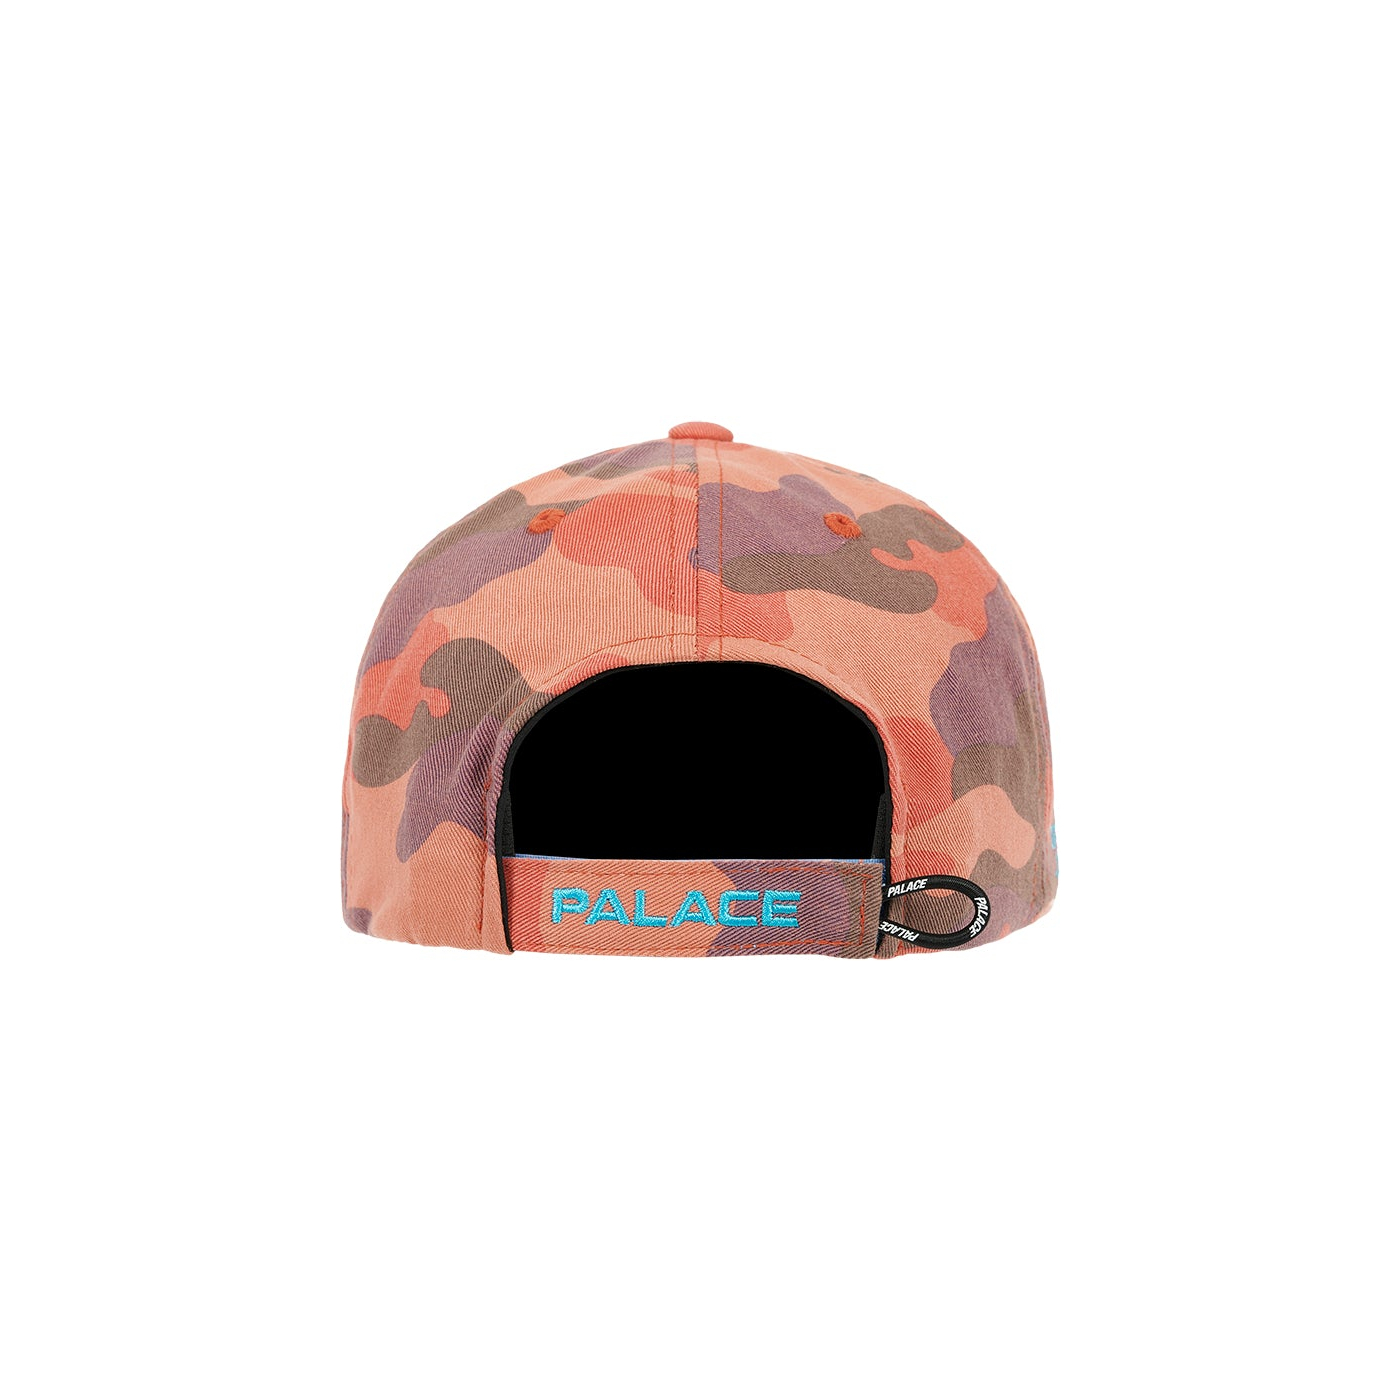 Thumbnail OM 6-PANEL PINK CAMO one color